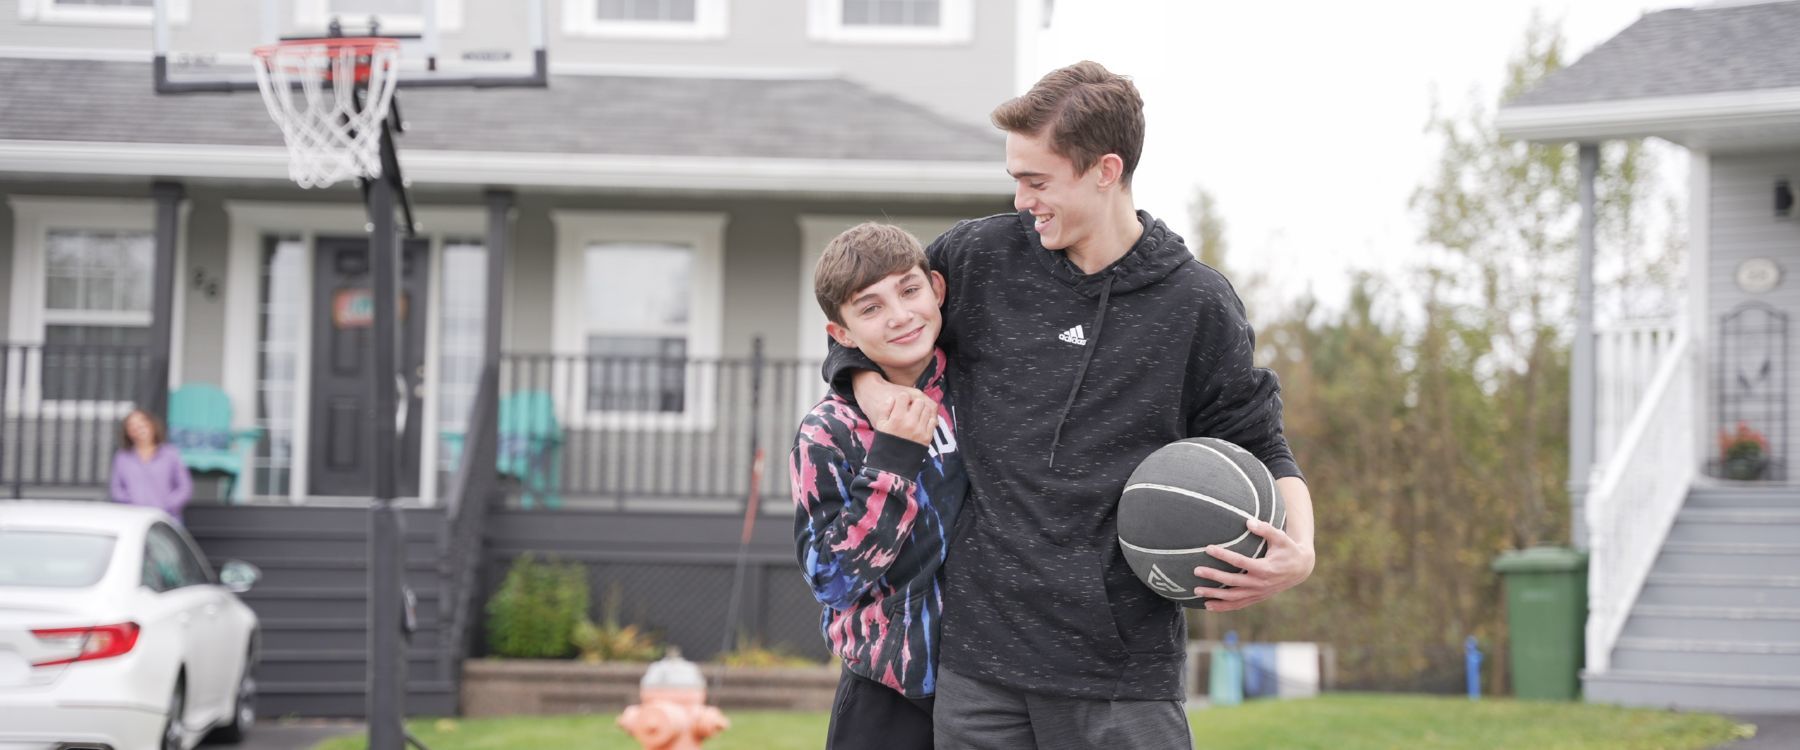 Ryan and Kyle Miller smiling while playing basketball outside in front of their family home